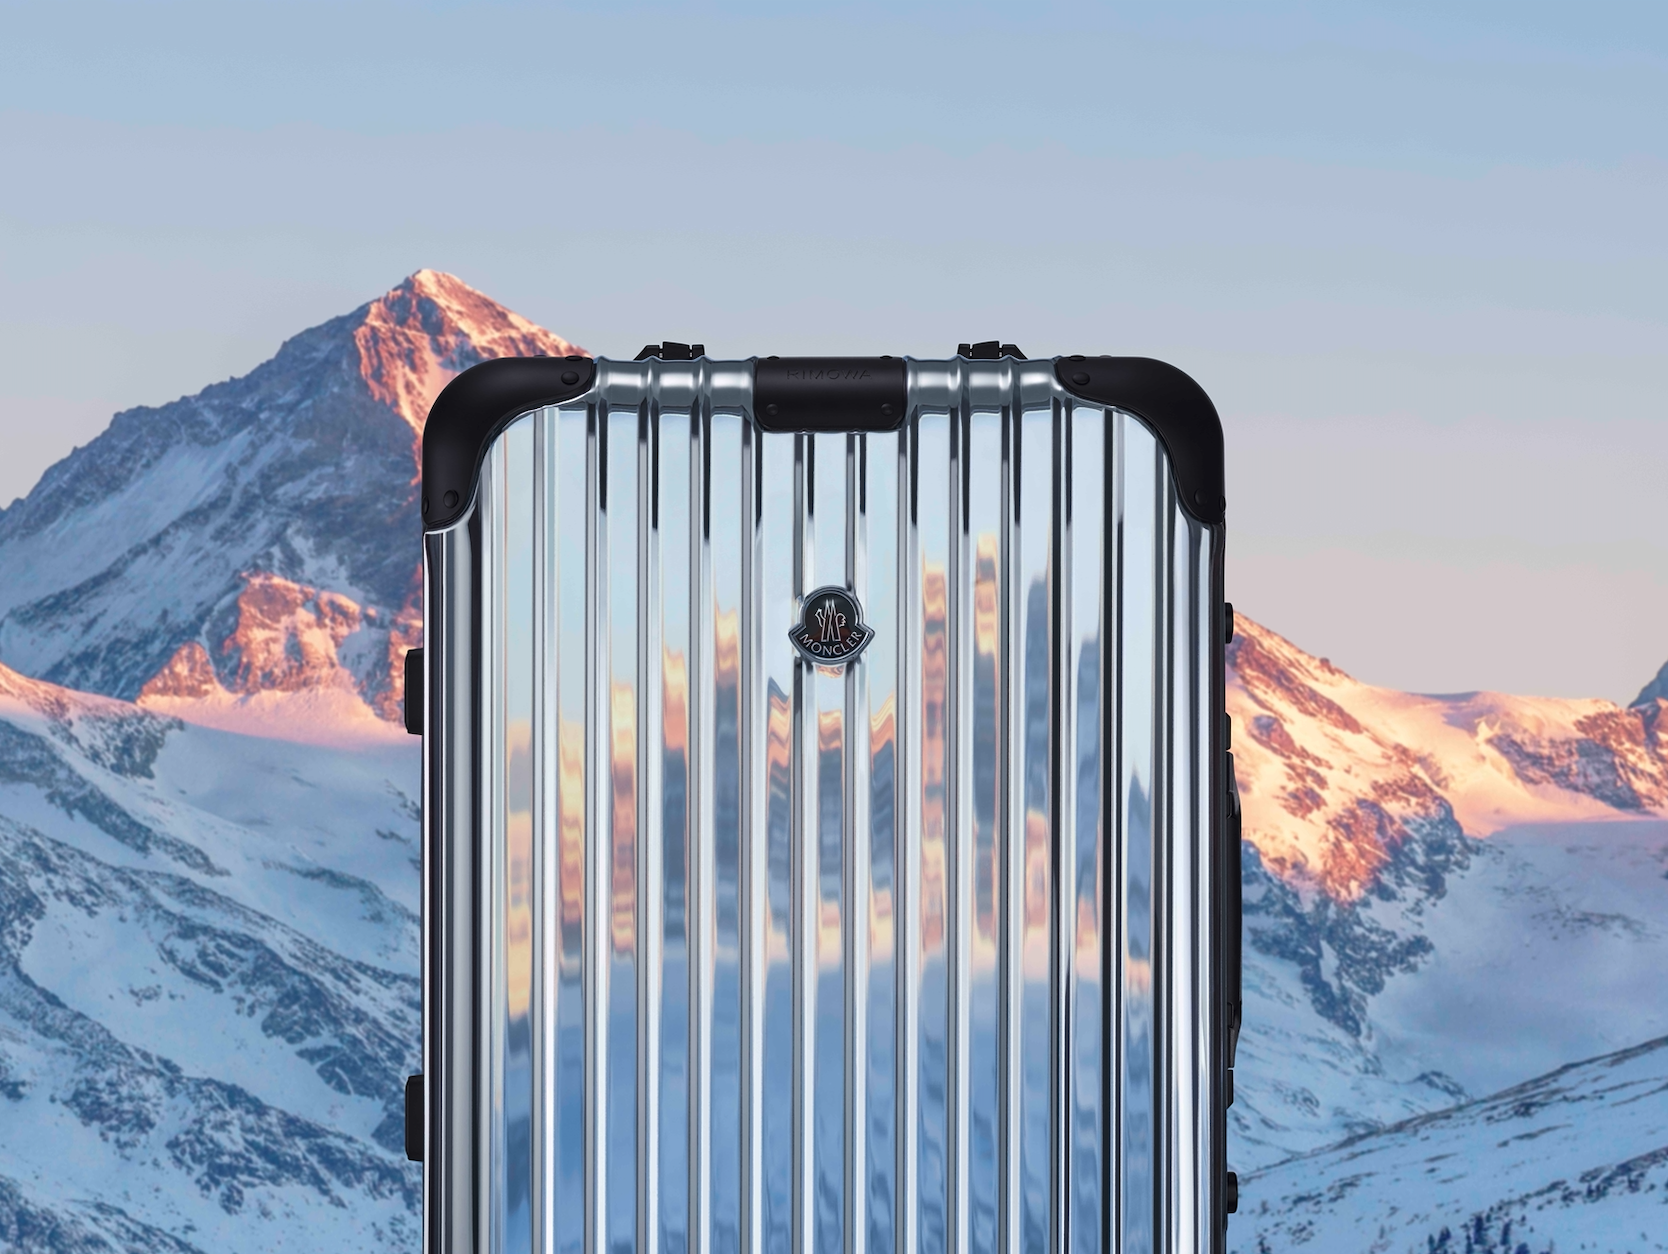 MONCLER_RIMOWA_REFLECTION_EDITORIAL_STILL_LIFE_IMAGES_07FLAUNT.jpg